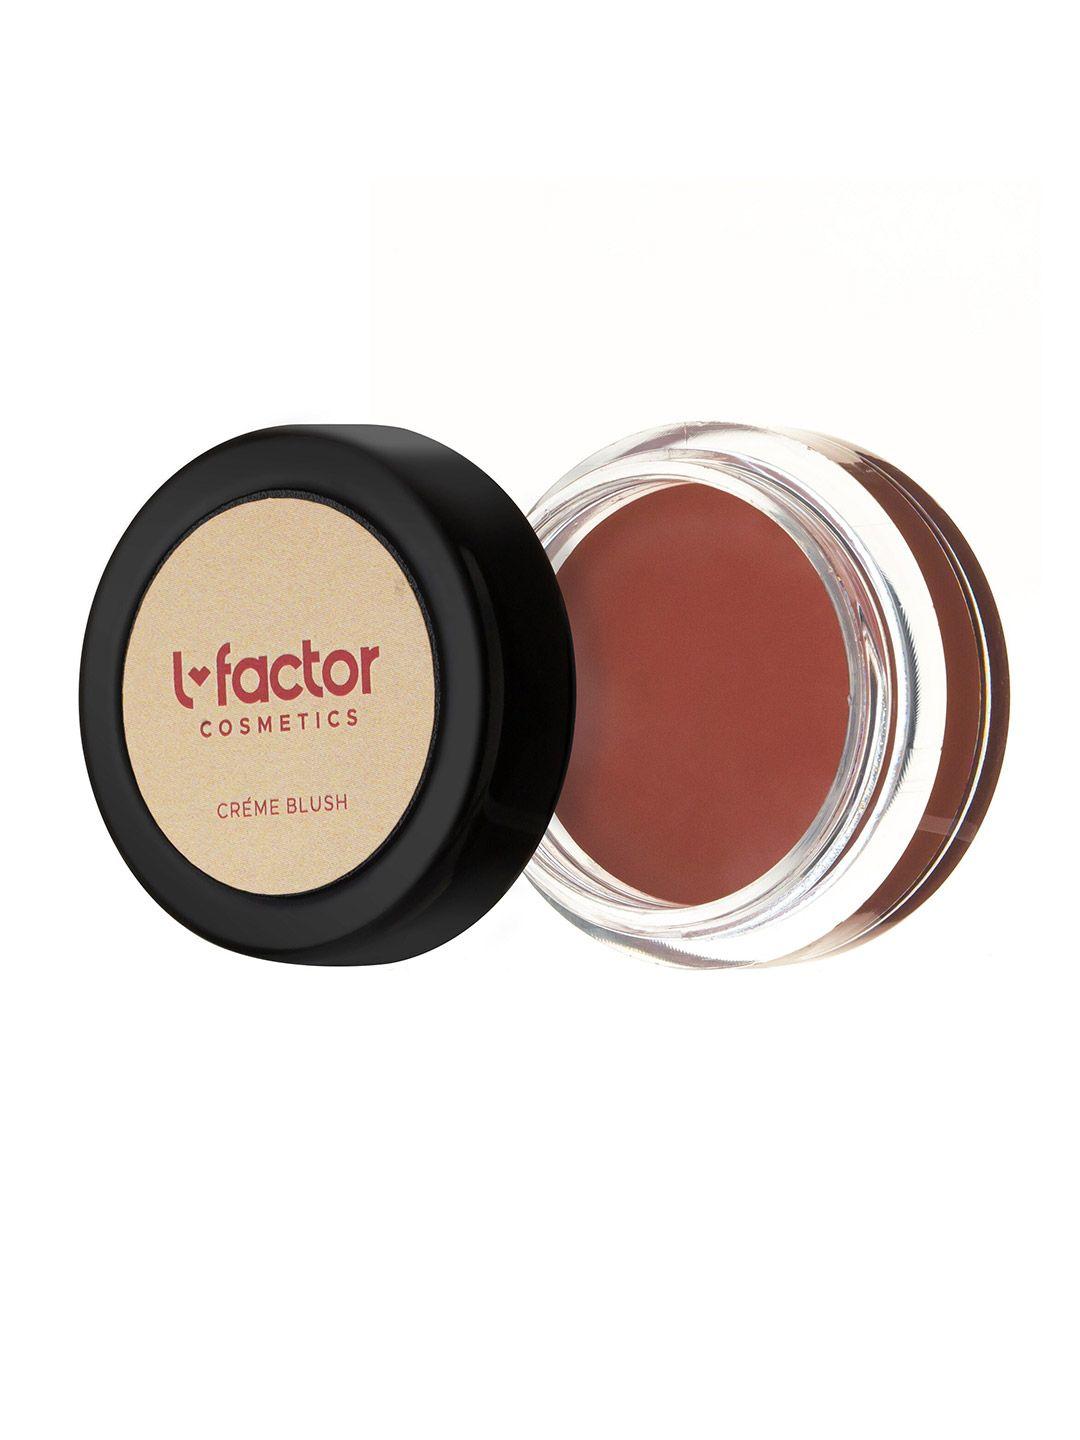 l factor cosmetics weightless vegan creme blush with grapeseed oil 5g - boss babe